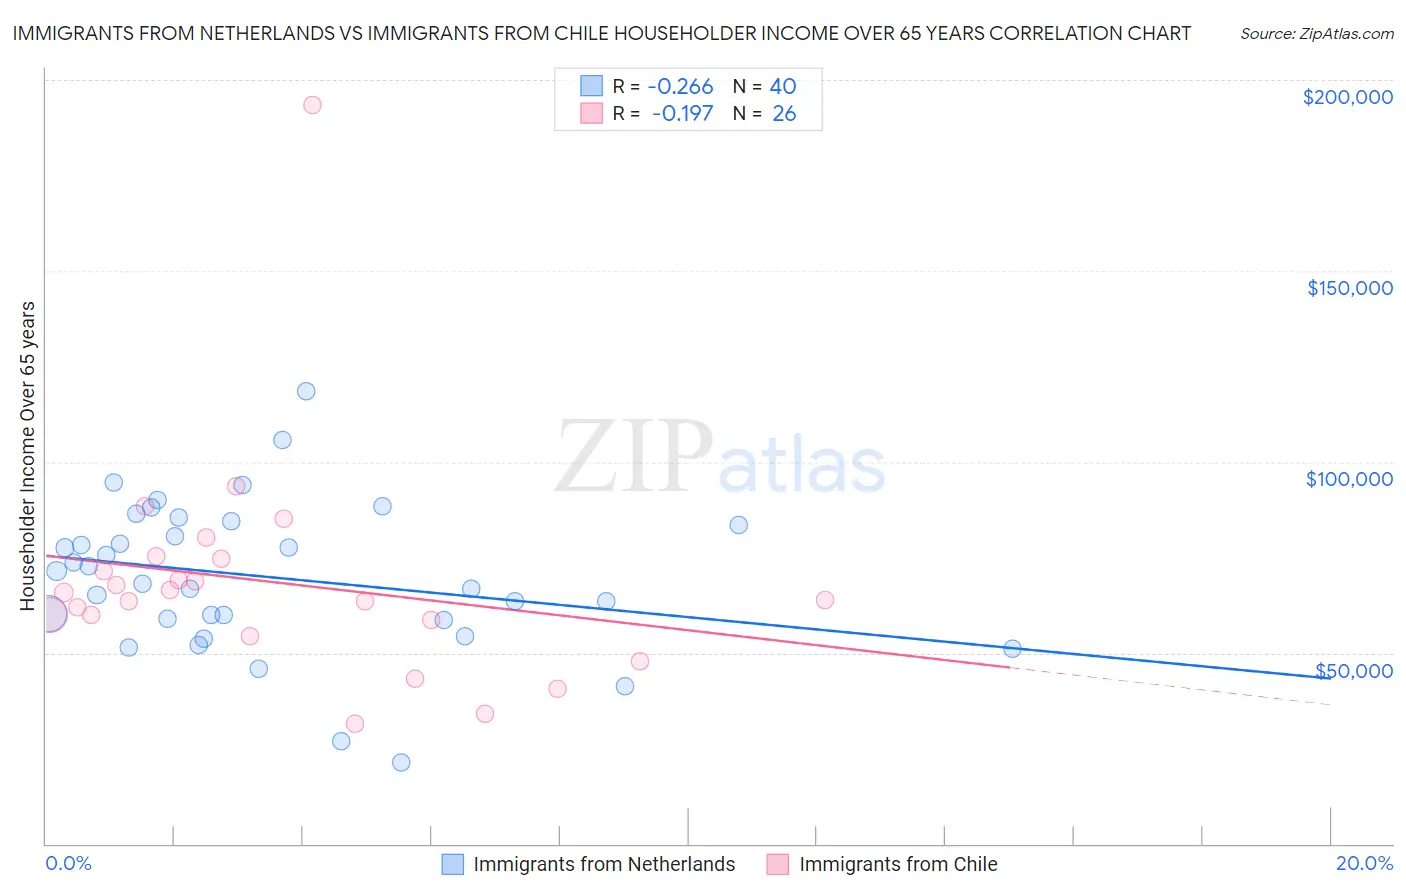 Immigrants from Netherlands vs Immigrants from Chile Householder Income Over 65 years